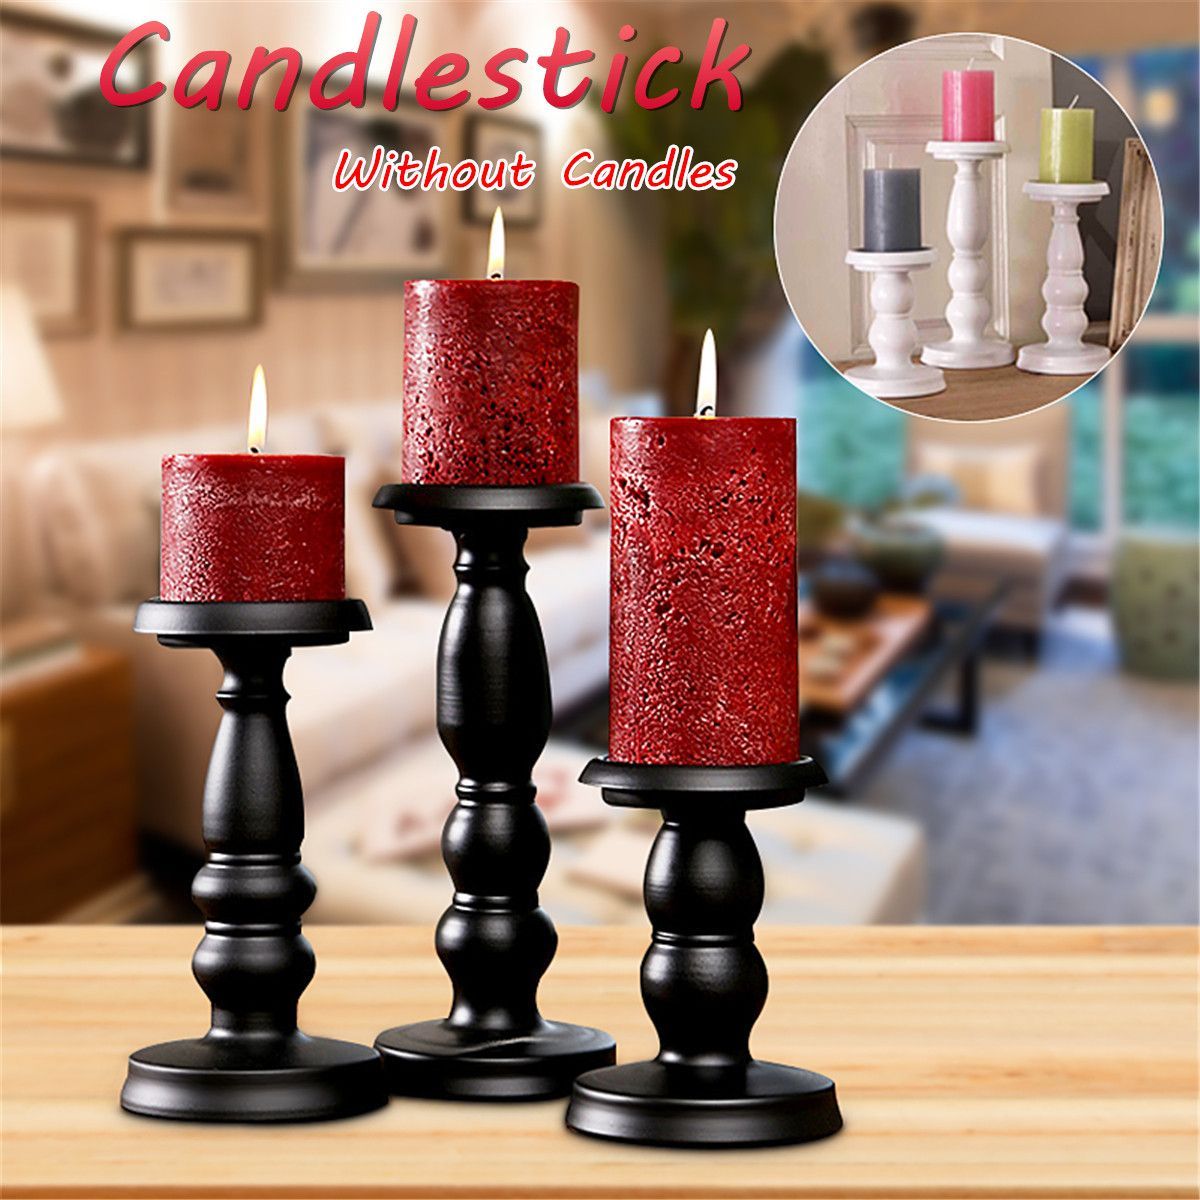 SML-Metal-Candlestick-Candle-Holder-Stand-Wedding-Party-Table-Home-Decor-Gift-1379214